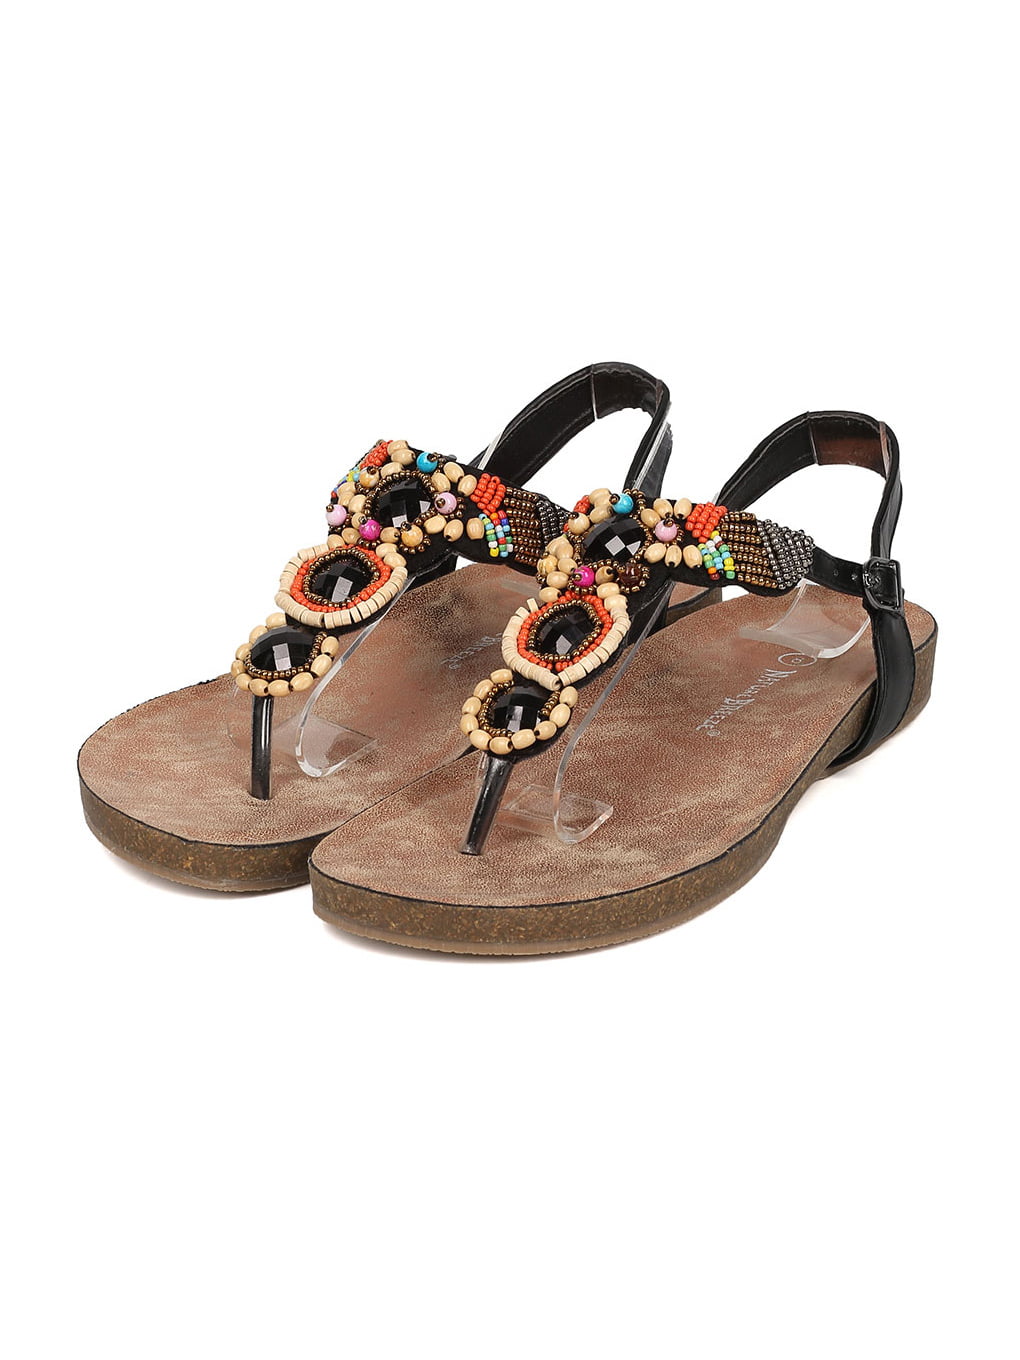 New Women Nature Breeze Qute-01 Mixed Media Tribal Gems and Beads T-Strap Sandal 